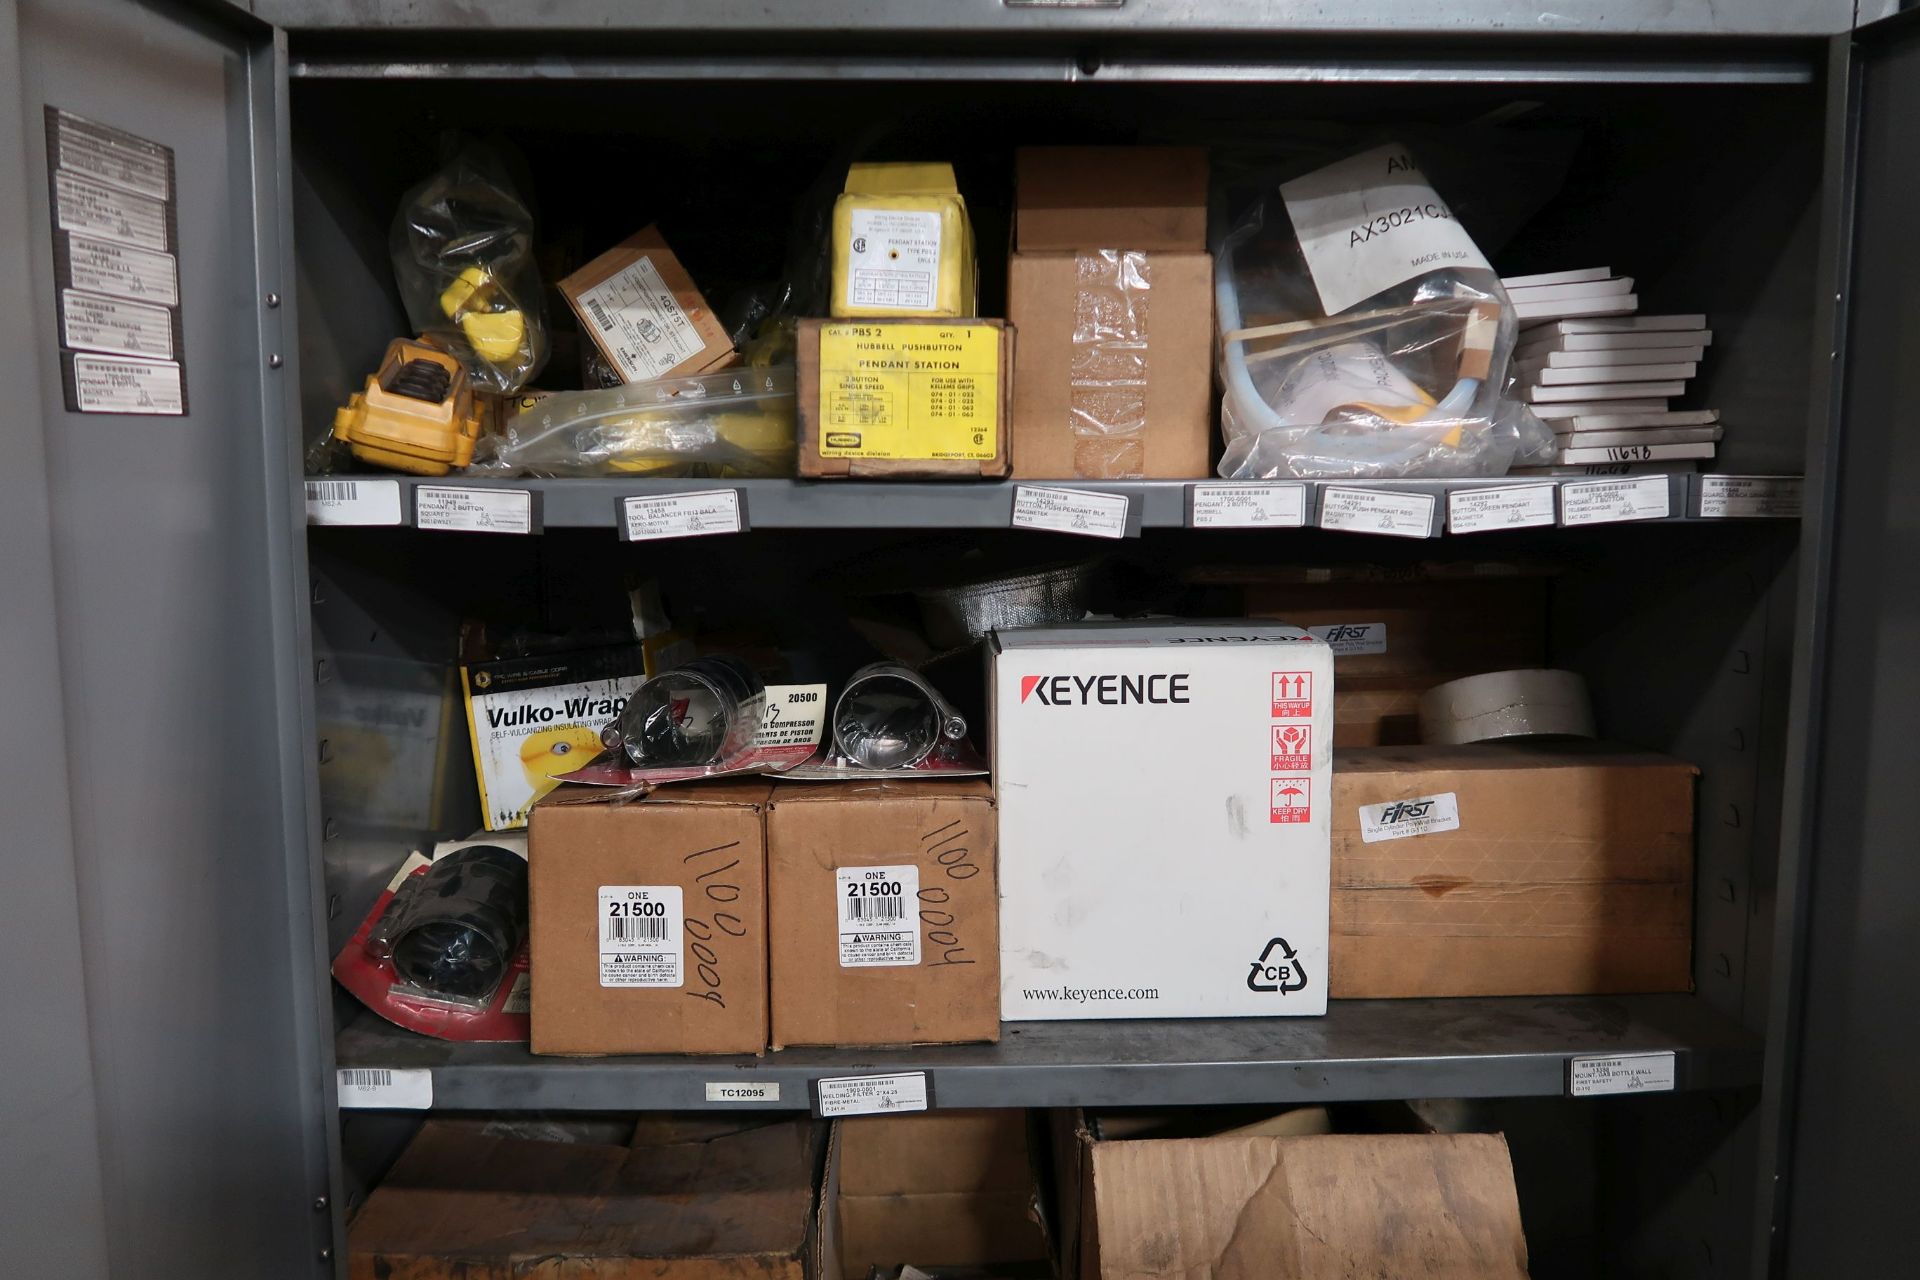 (LOT) STORAGE CABINET WITH MACHINE PARTS **LOADING PRICE DUE TO ERRA - $50.00** - Image 2 of 3